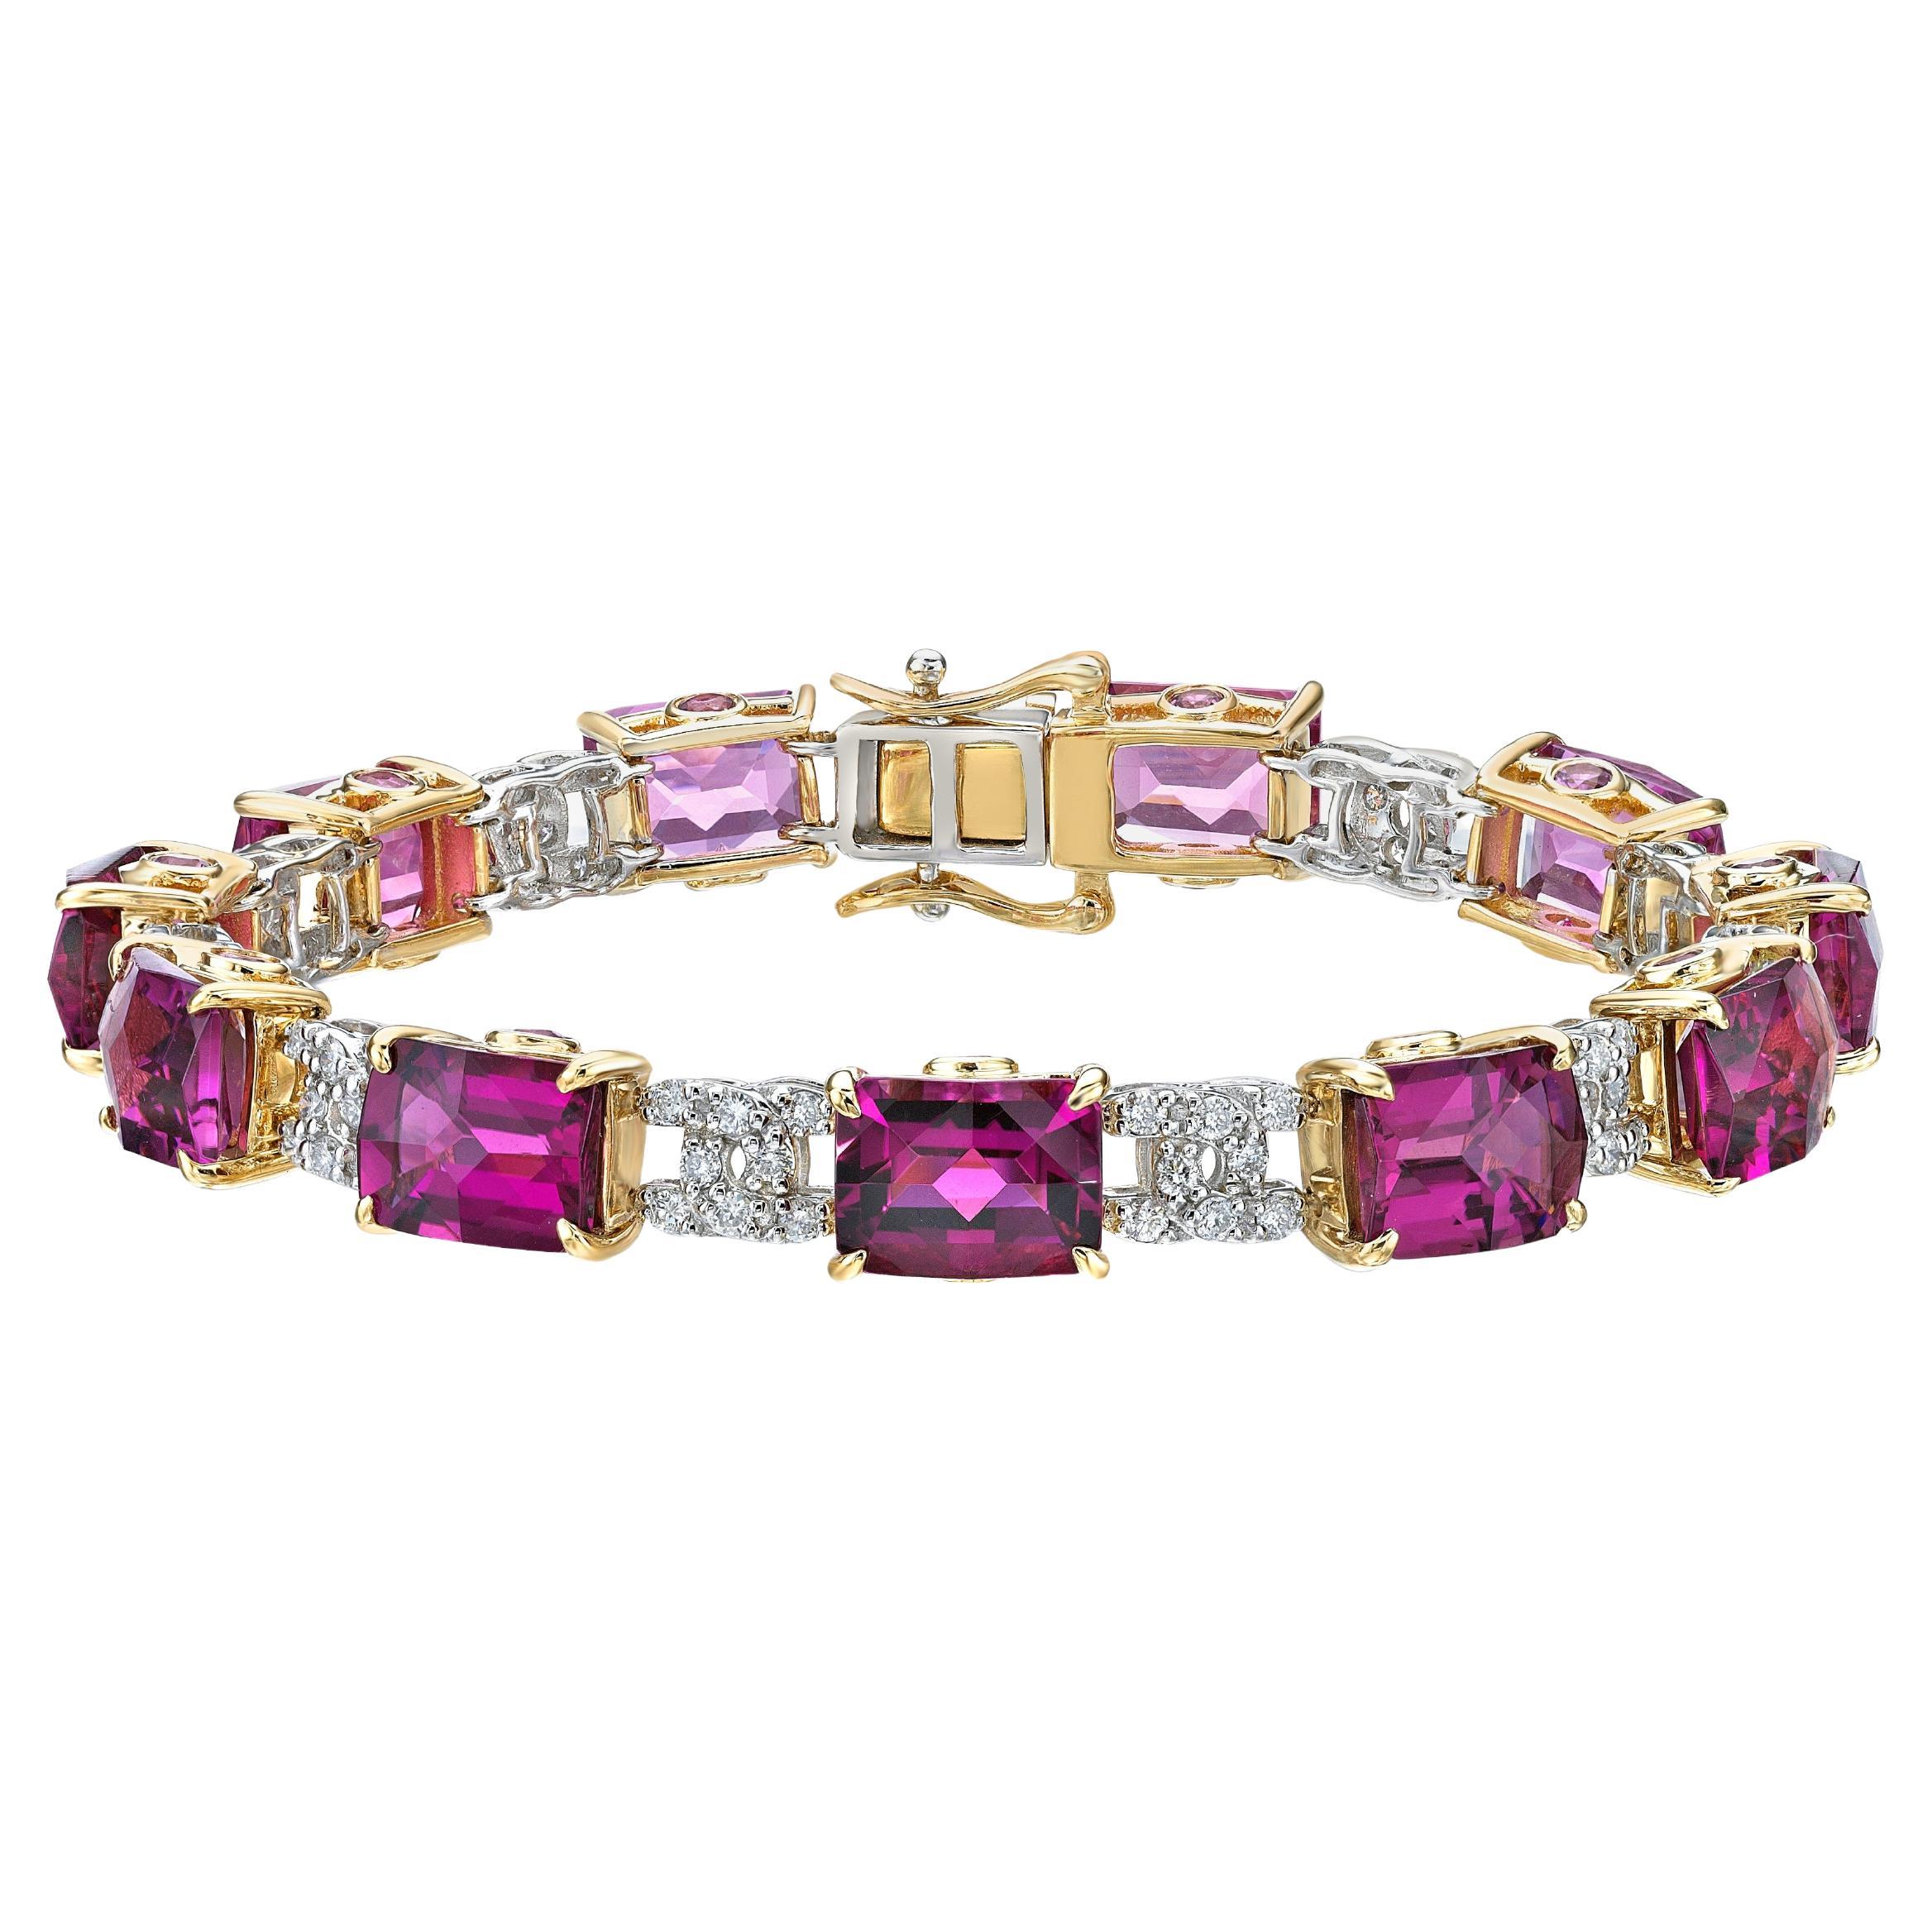 Pink Tourmaline Bracelet in 18 Karat Yellow and White Gold with White Diamond For Sale